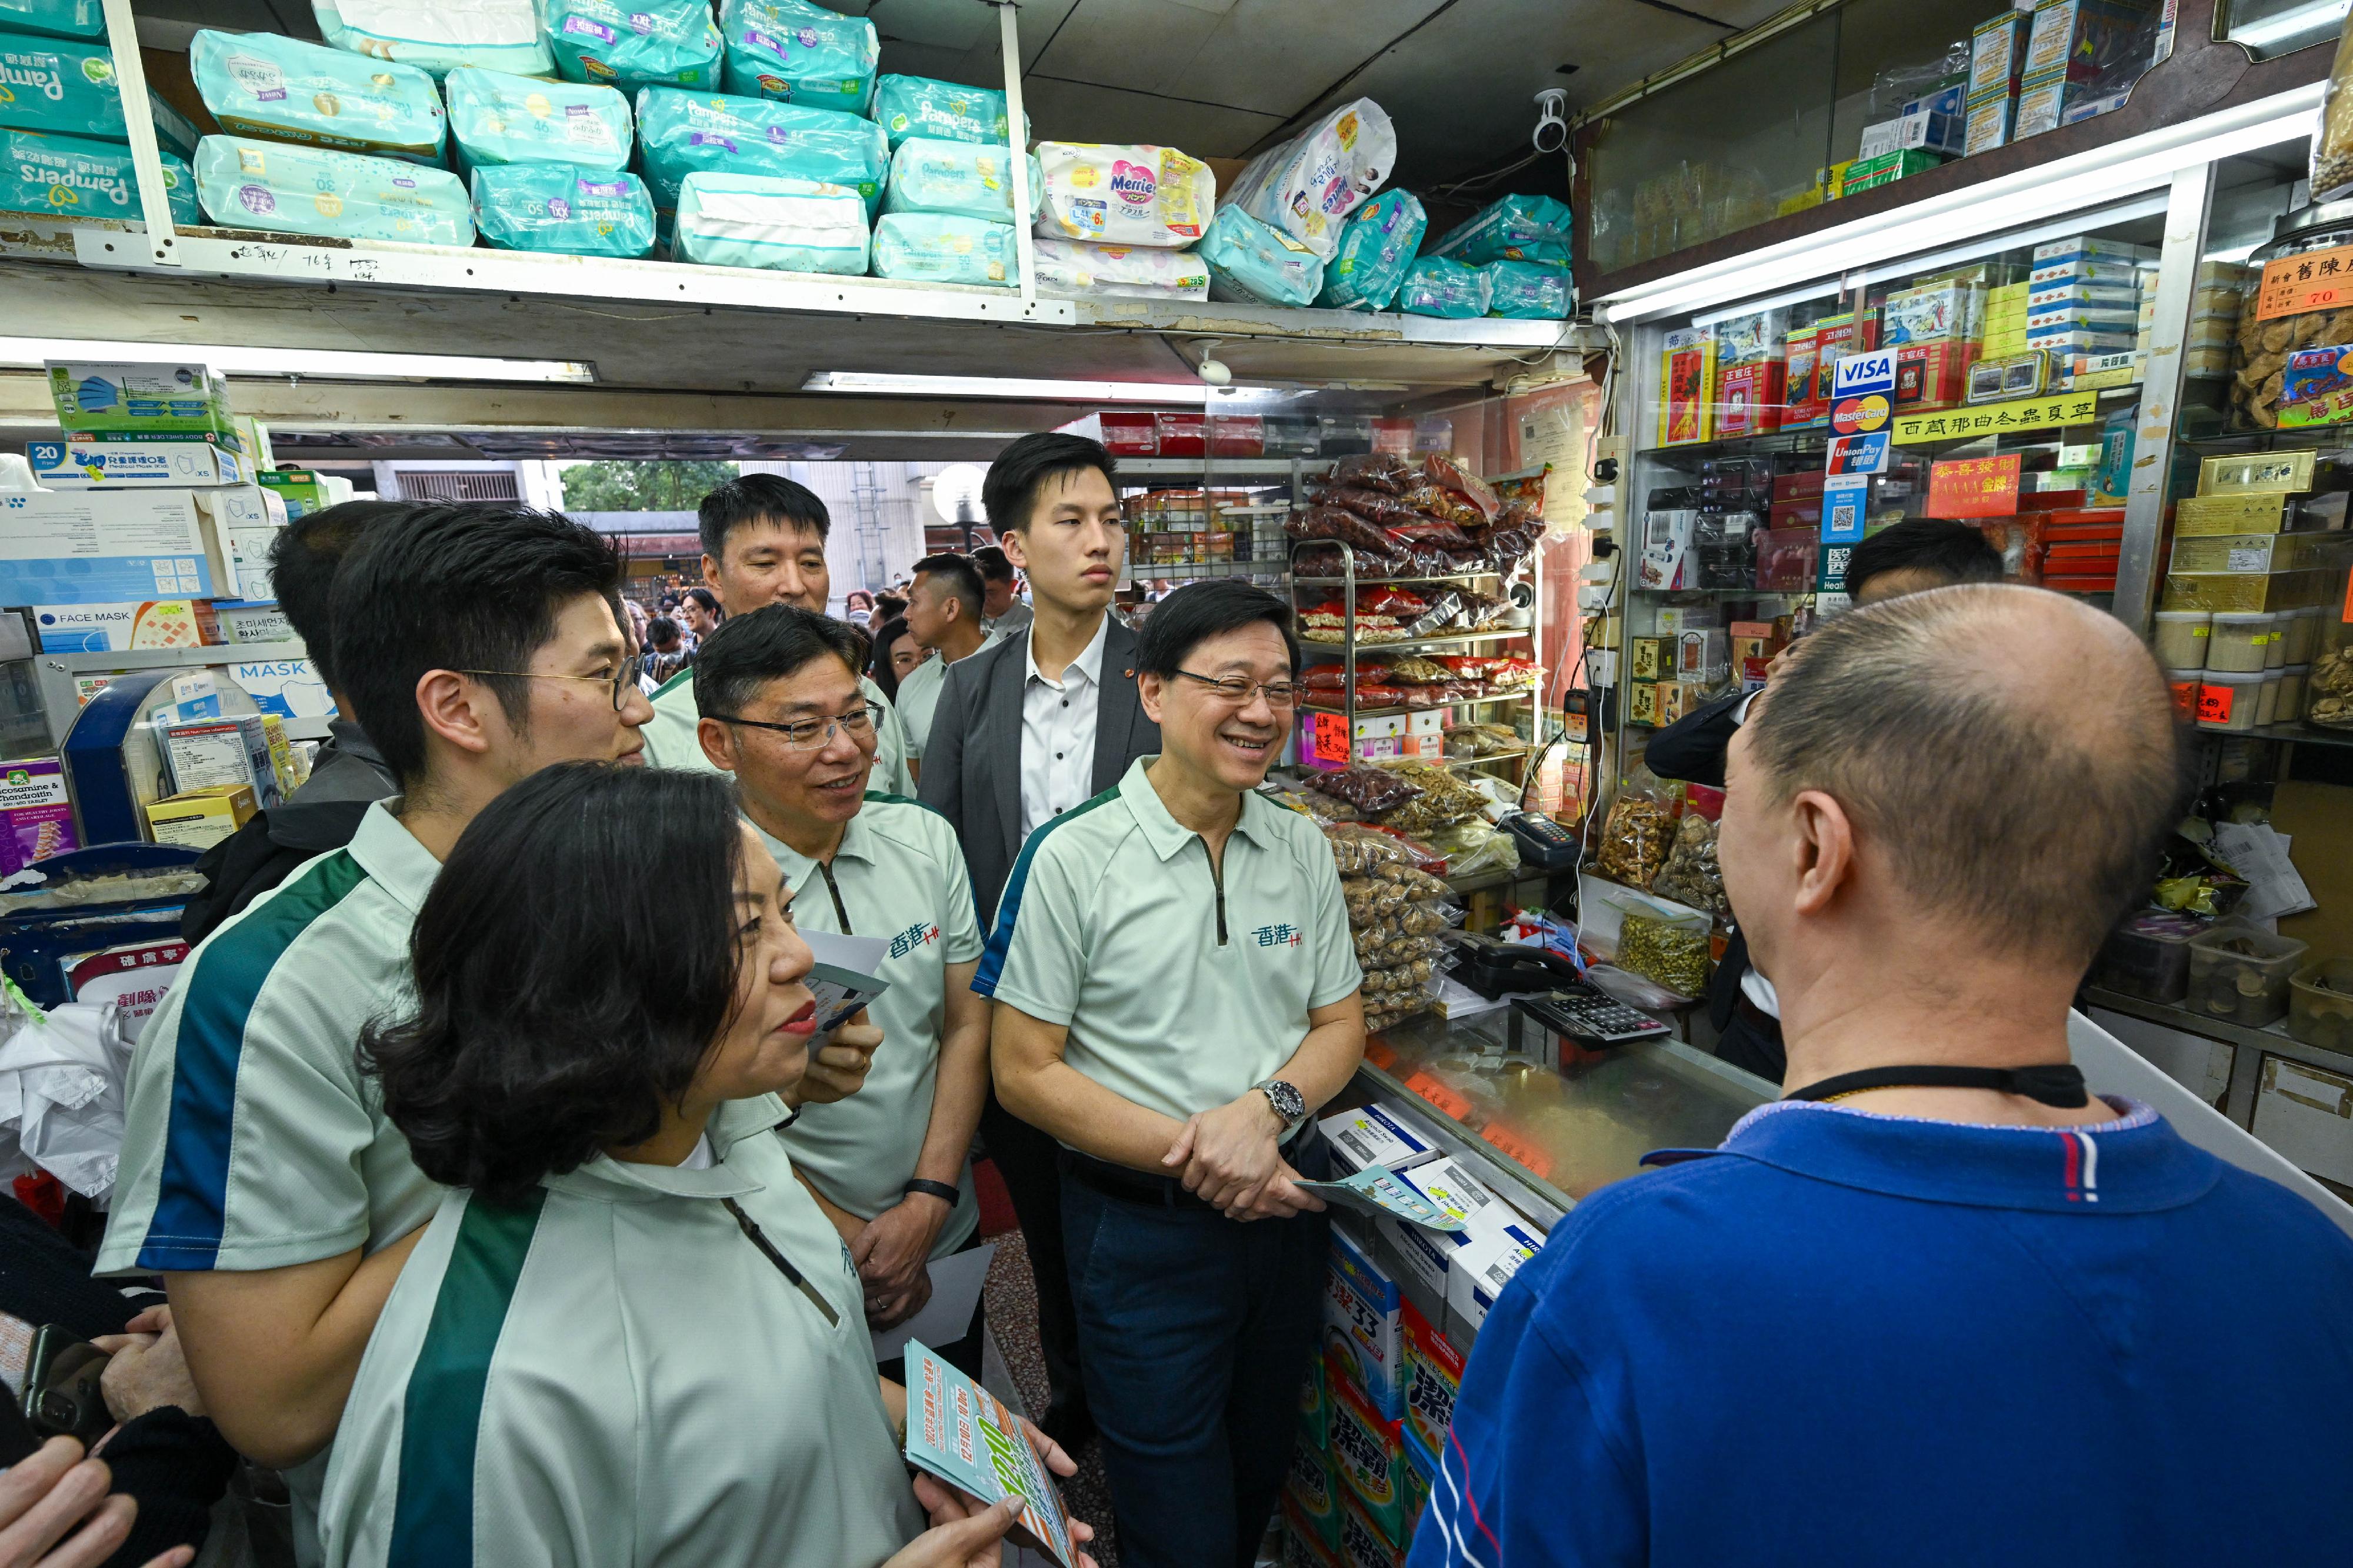 The Chief Executive, Mr John Lee, visited Shun Lee Estate in Kwun Tong today (November 15). Photo shows Mr Lee (front row, first right), accompanied by the Secretary for Transport and Logistics, Mr Lam Sai-hung (front row, second right) and the Secretary for Home and Youth Affairs, Miss Alice Mak (front row, third right), exchanging views with a merchant to learn about his views on measures to strengthen the economy and improve people's livelihood in the Policy Address.